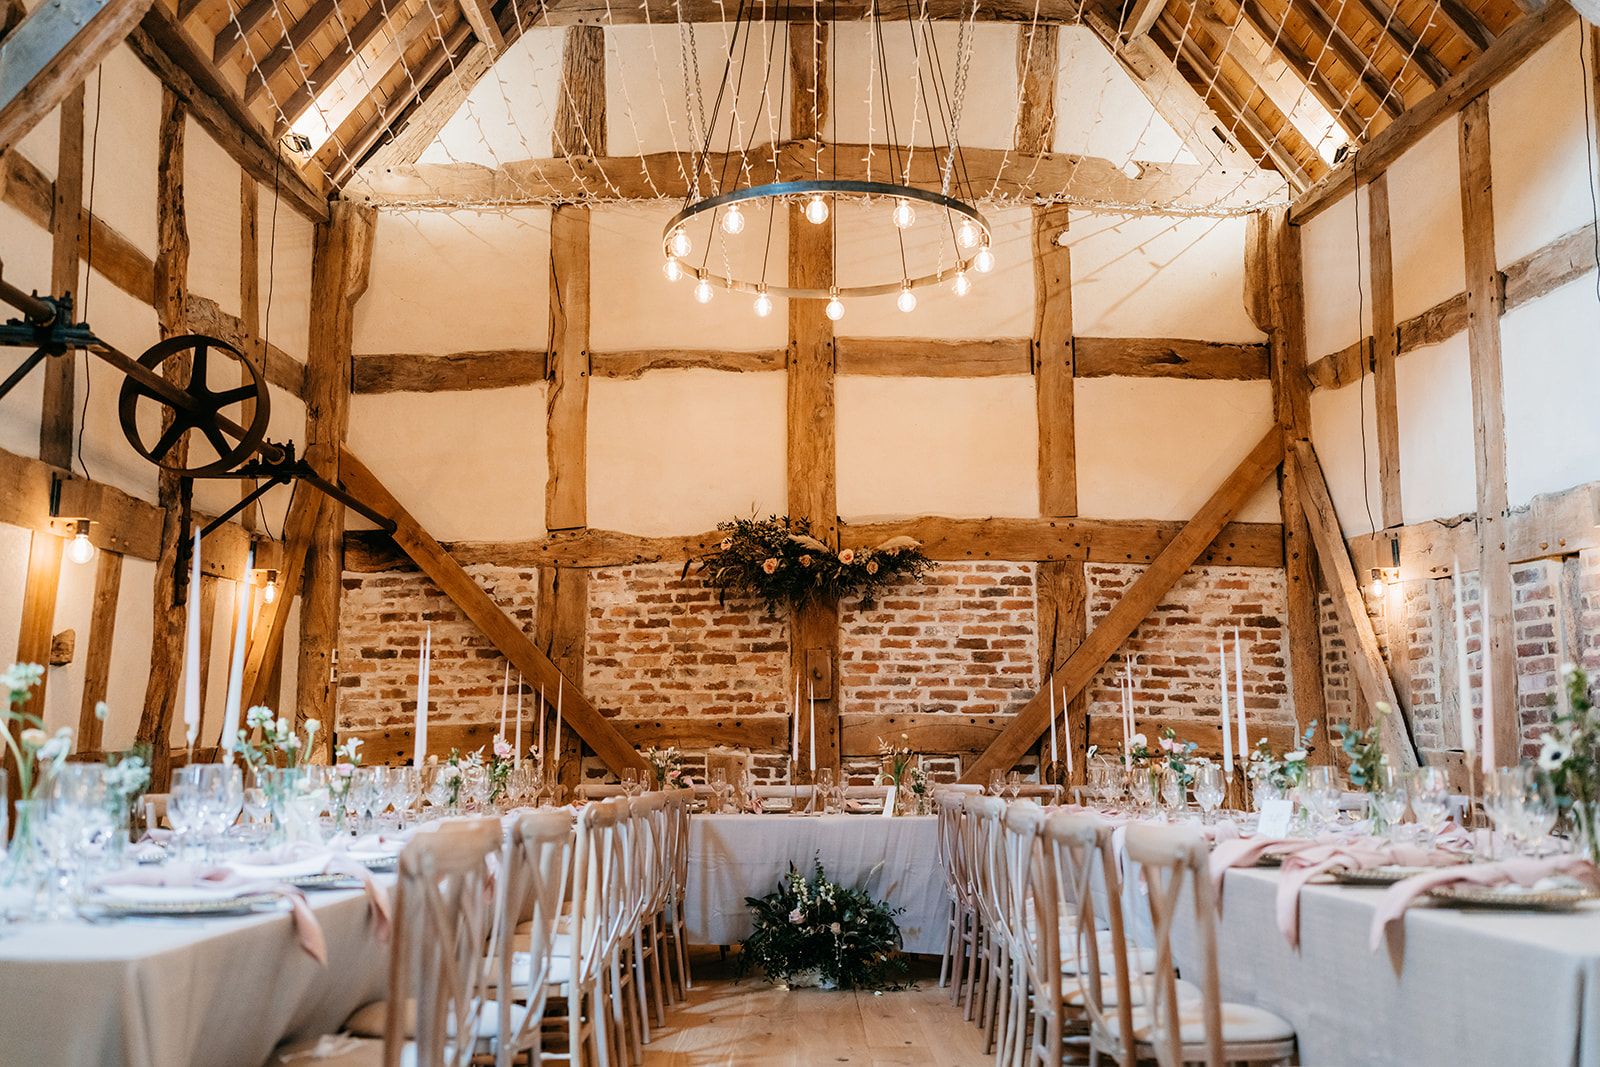 Barns & Yard wedding breakfast room decorated by Floral Findings